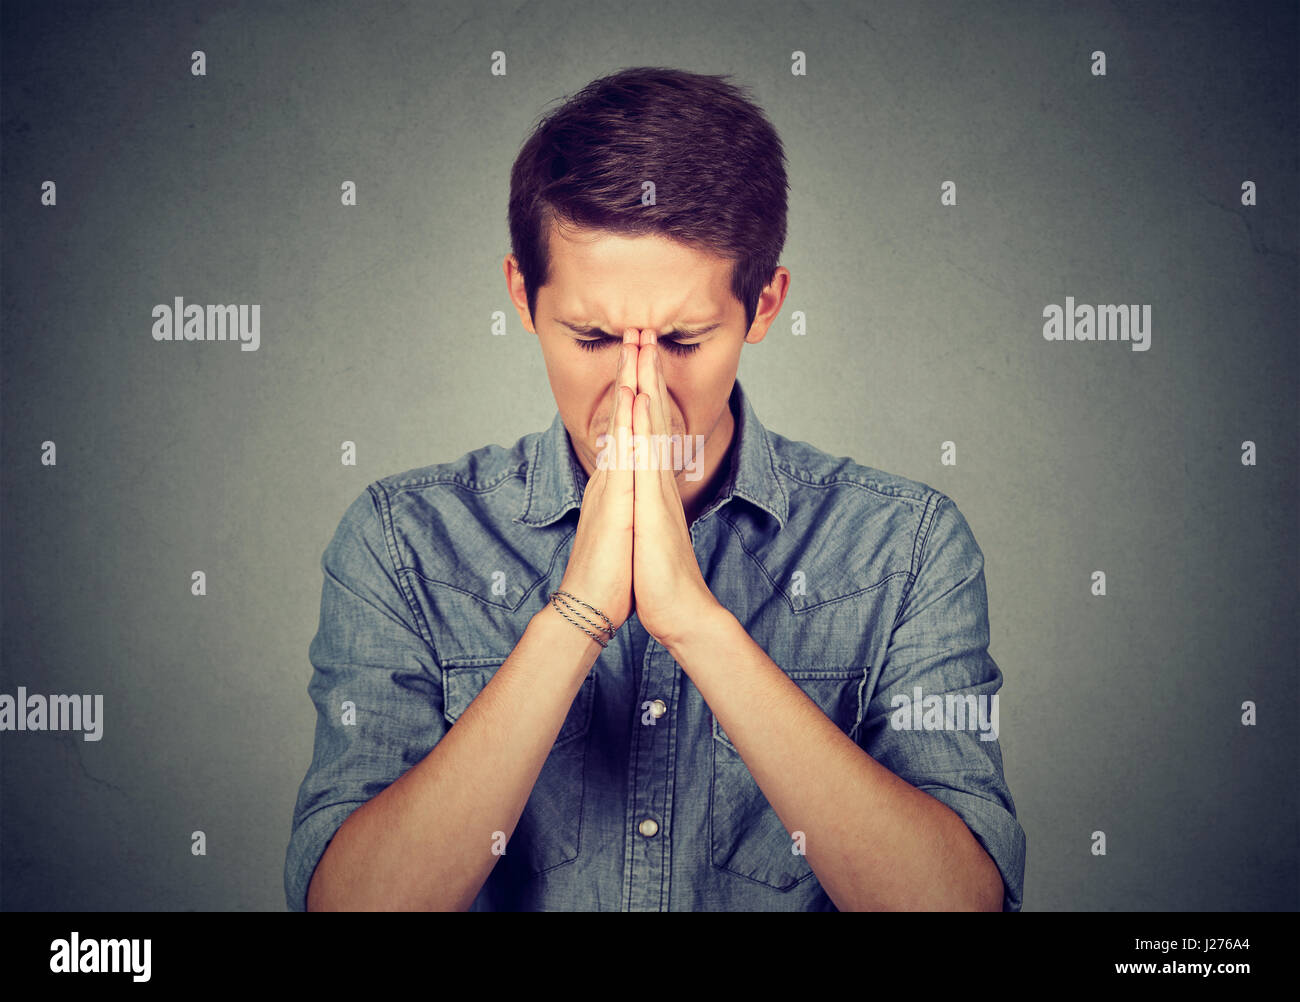 portrait of young desperate man praying Stock Photo